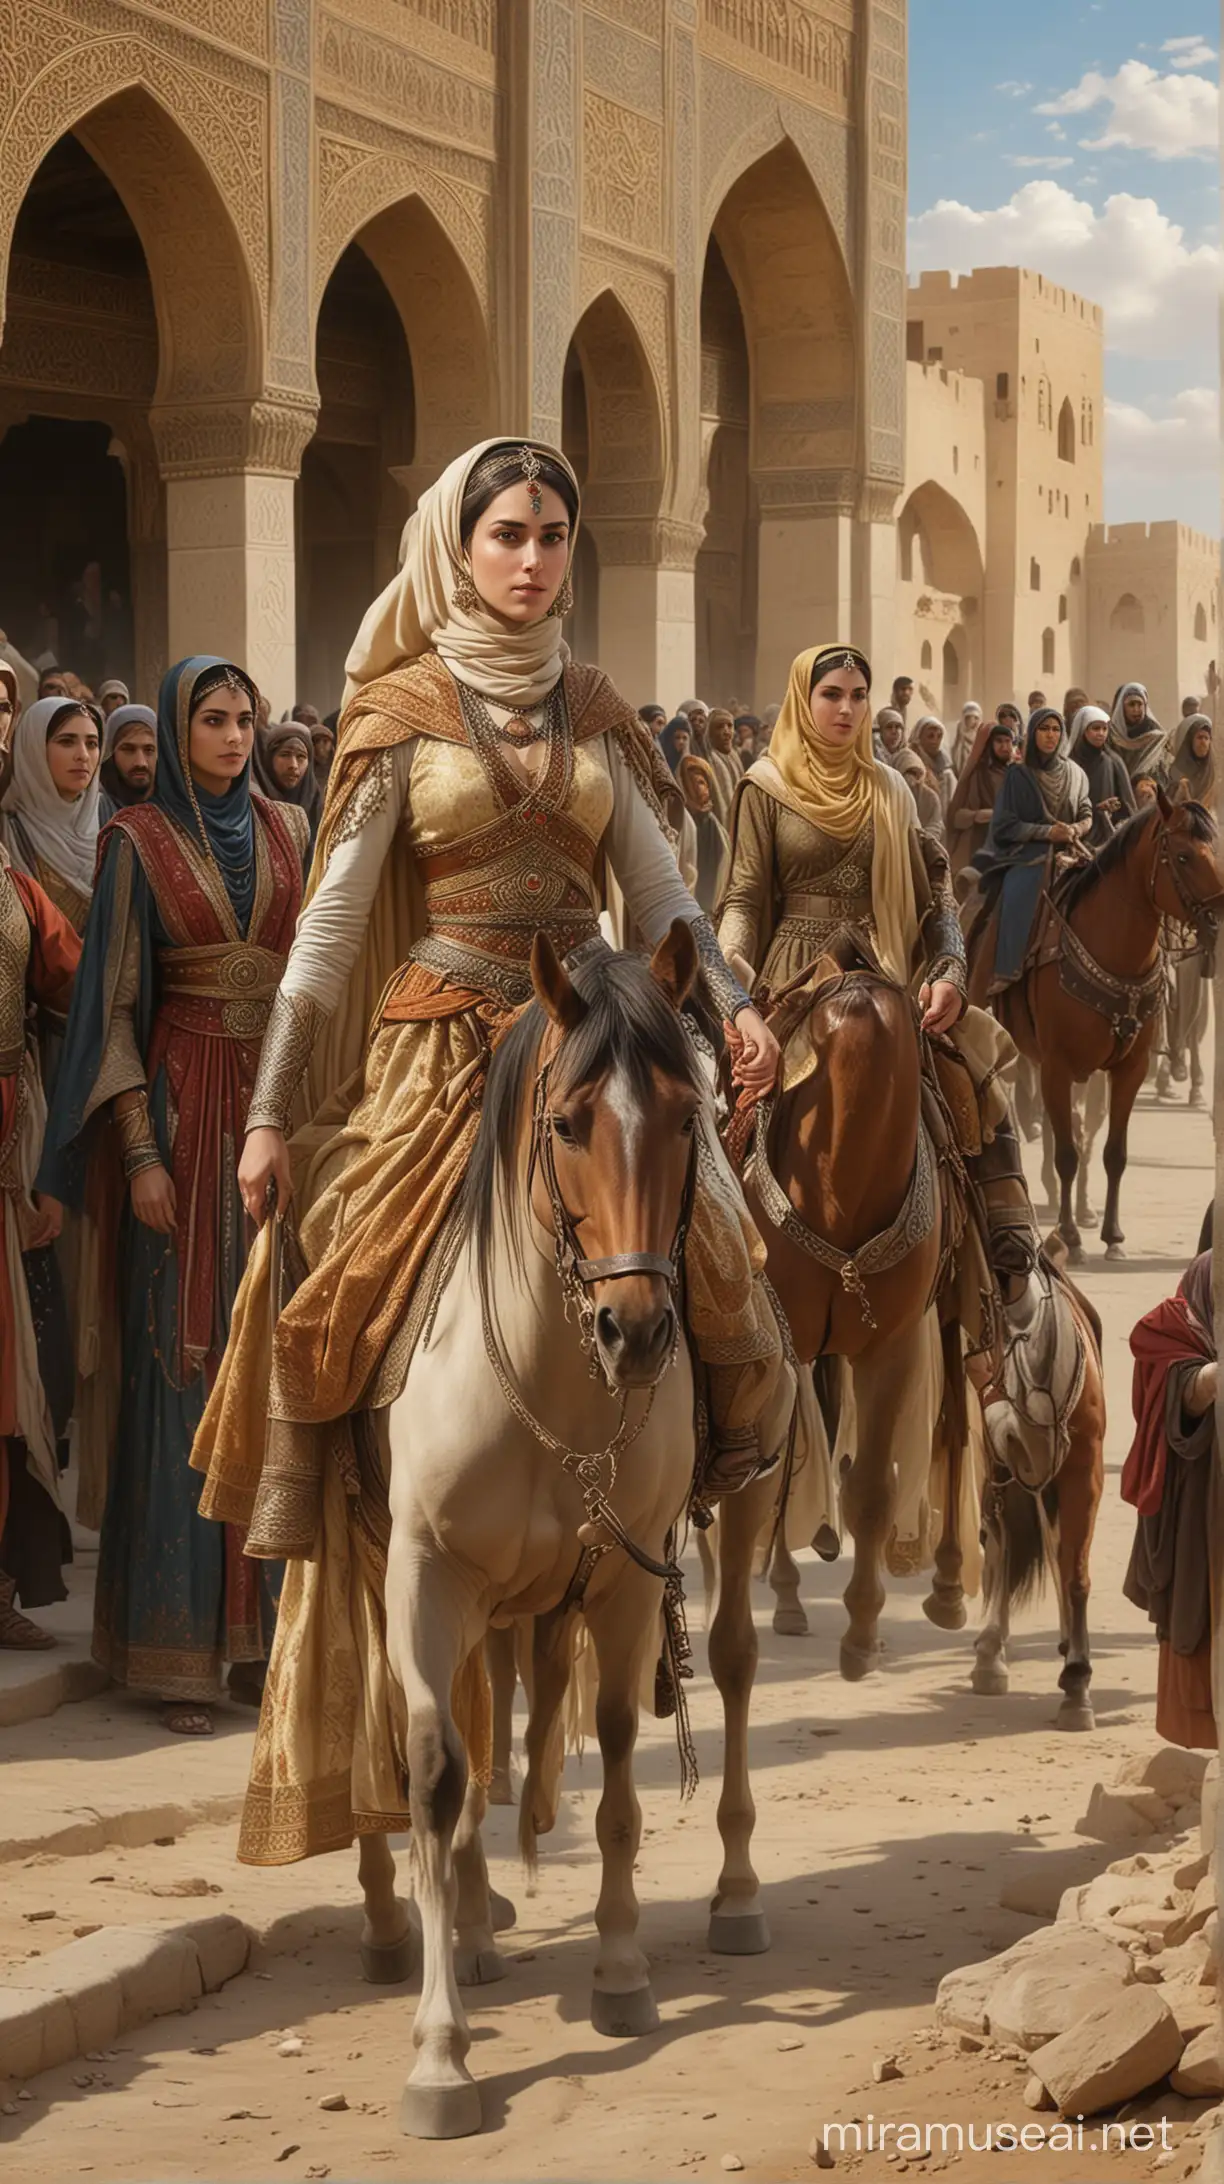 Princess Entourage Arrival in Persia Hyper Realistic Portrayal of Impending Conflict